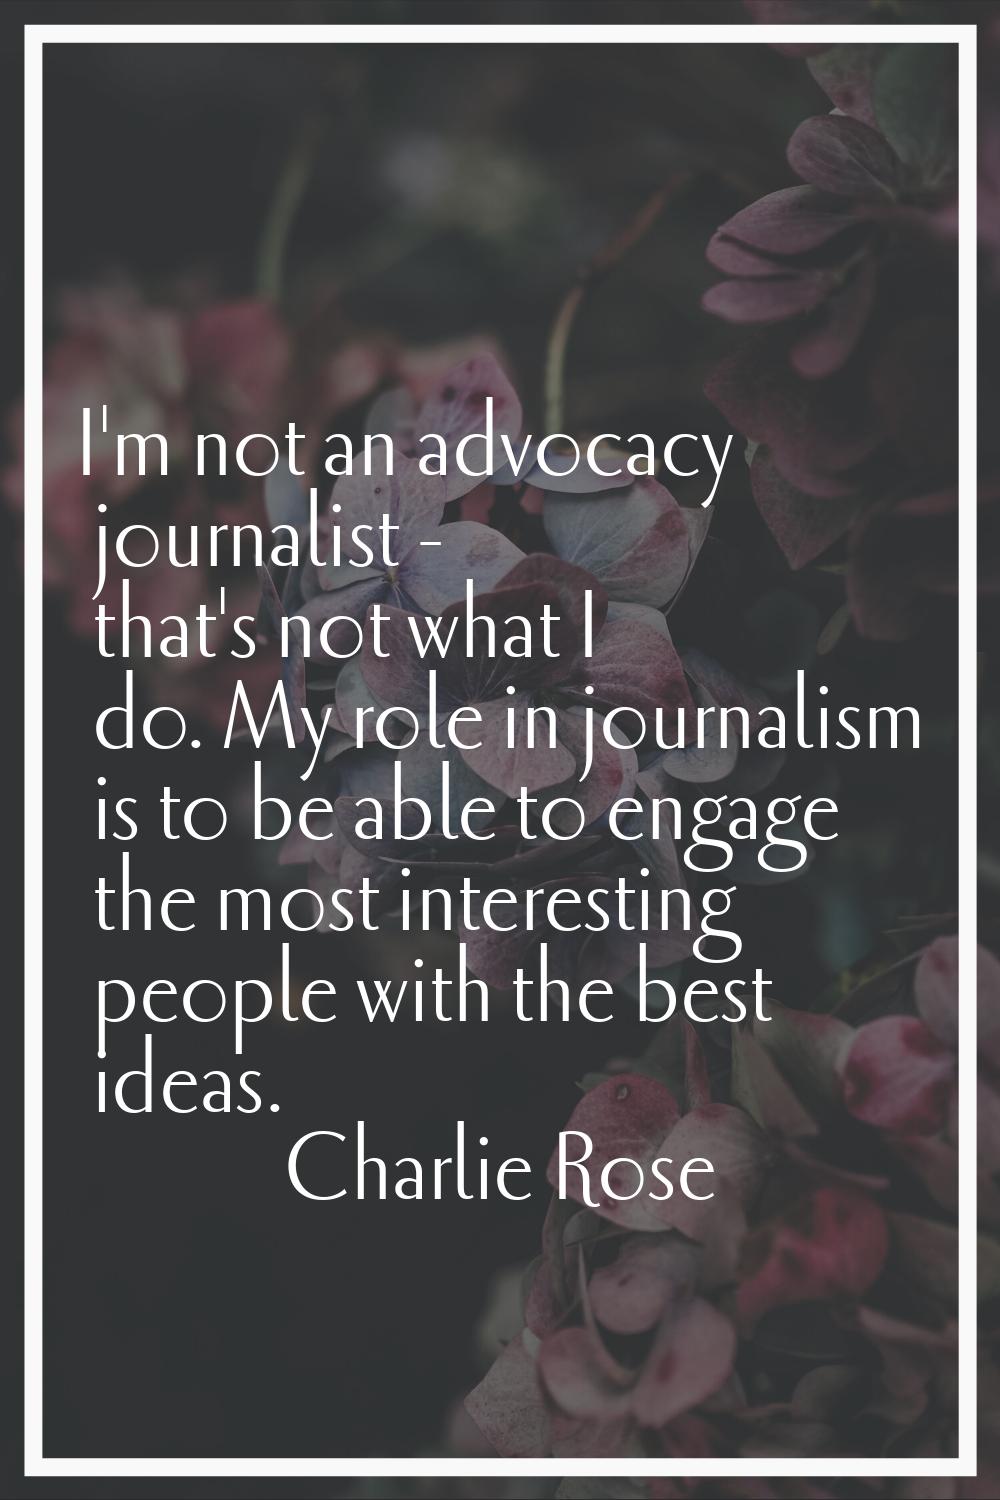 I'm not an advocacy journalist - that's not what I do. My role in journalism is to be able to engag